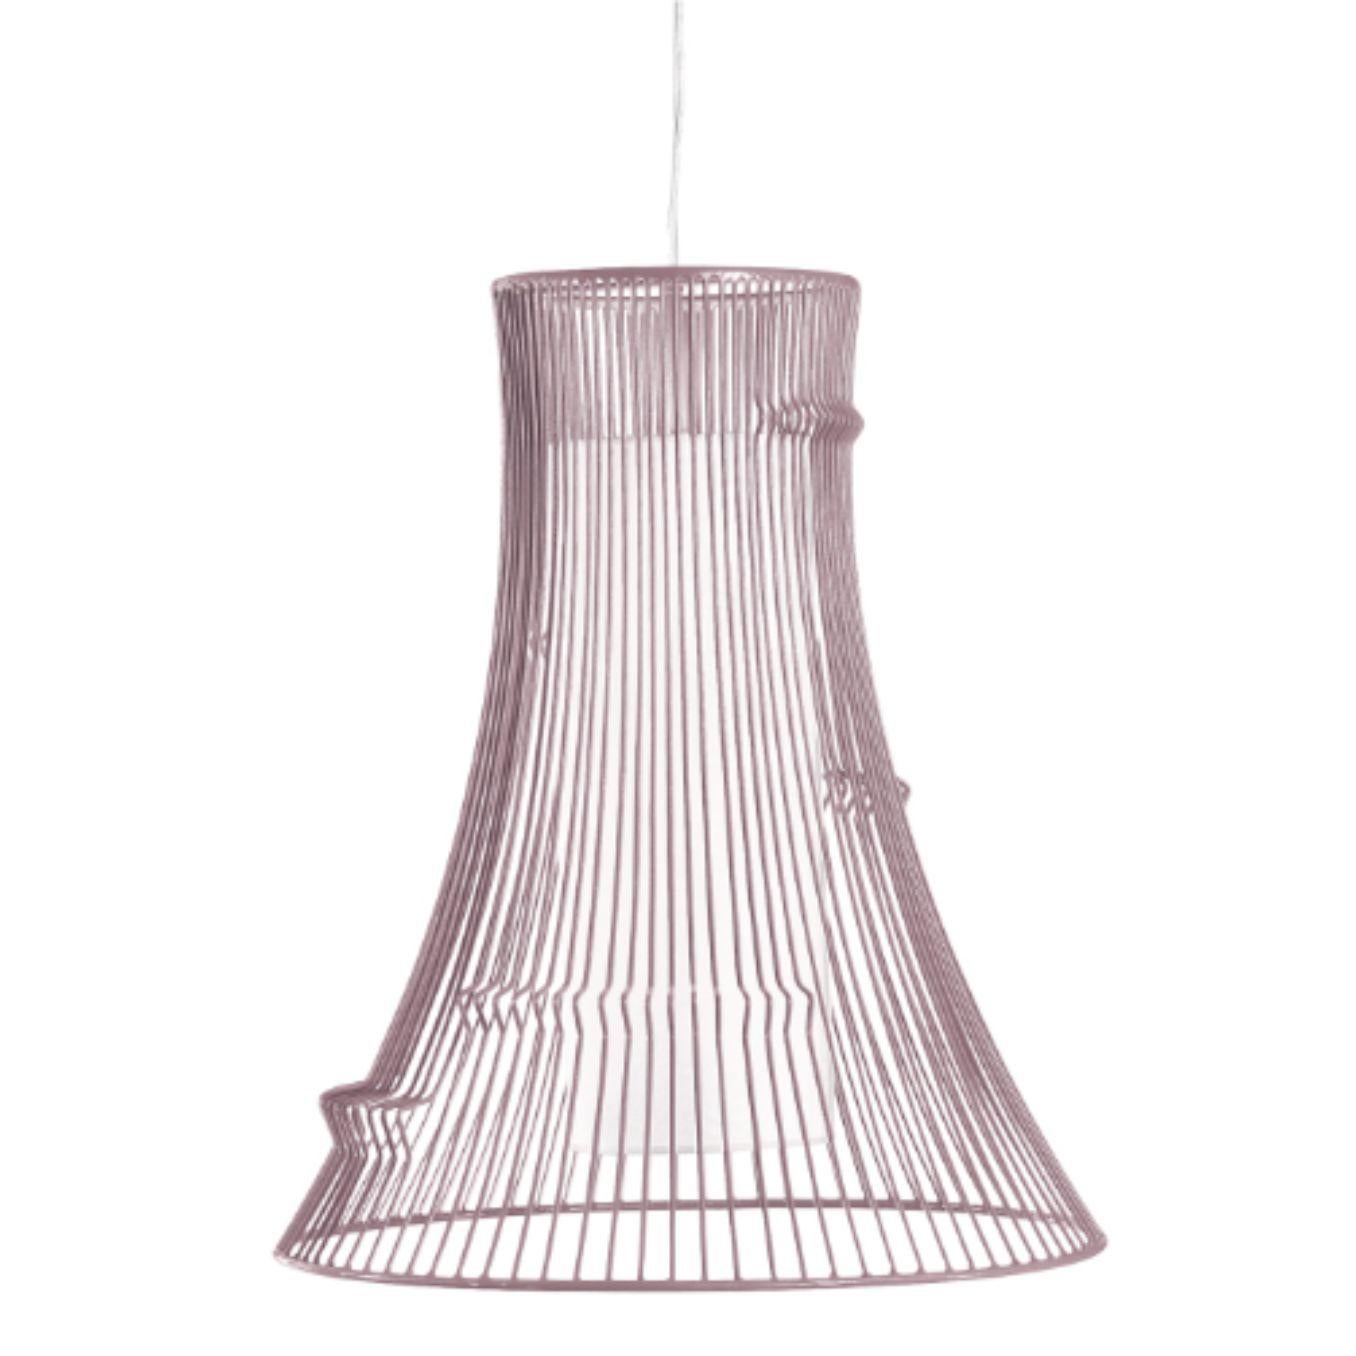 Lilac extrude suspension lamp by Dooq.
Dimensions: W 60 x D 60 x H 70 cm.
Materials: lacquered metal.
Abat-jour: cotton.
Also available in different colors and materials.

Information:
230V/50Hz
E27/1x20W LED
120V/60Hz
E26/1x15W LED
bulb not